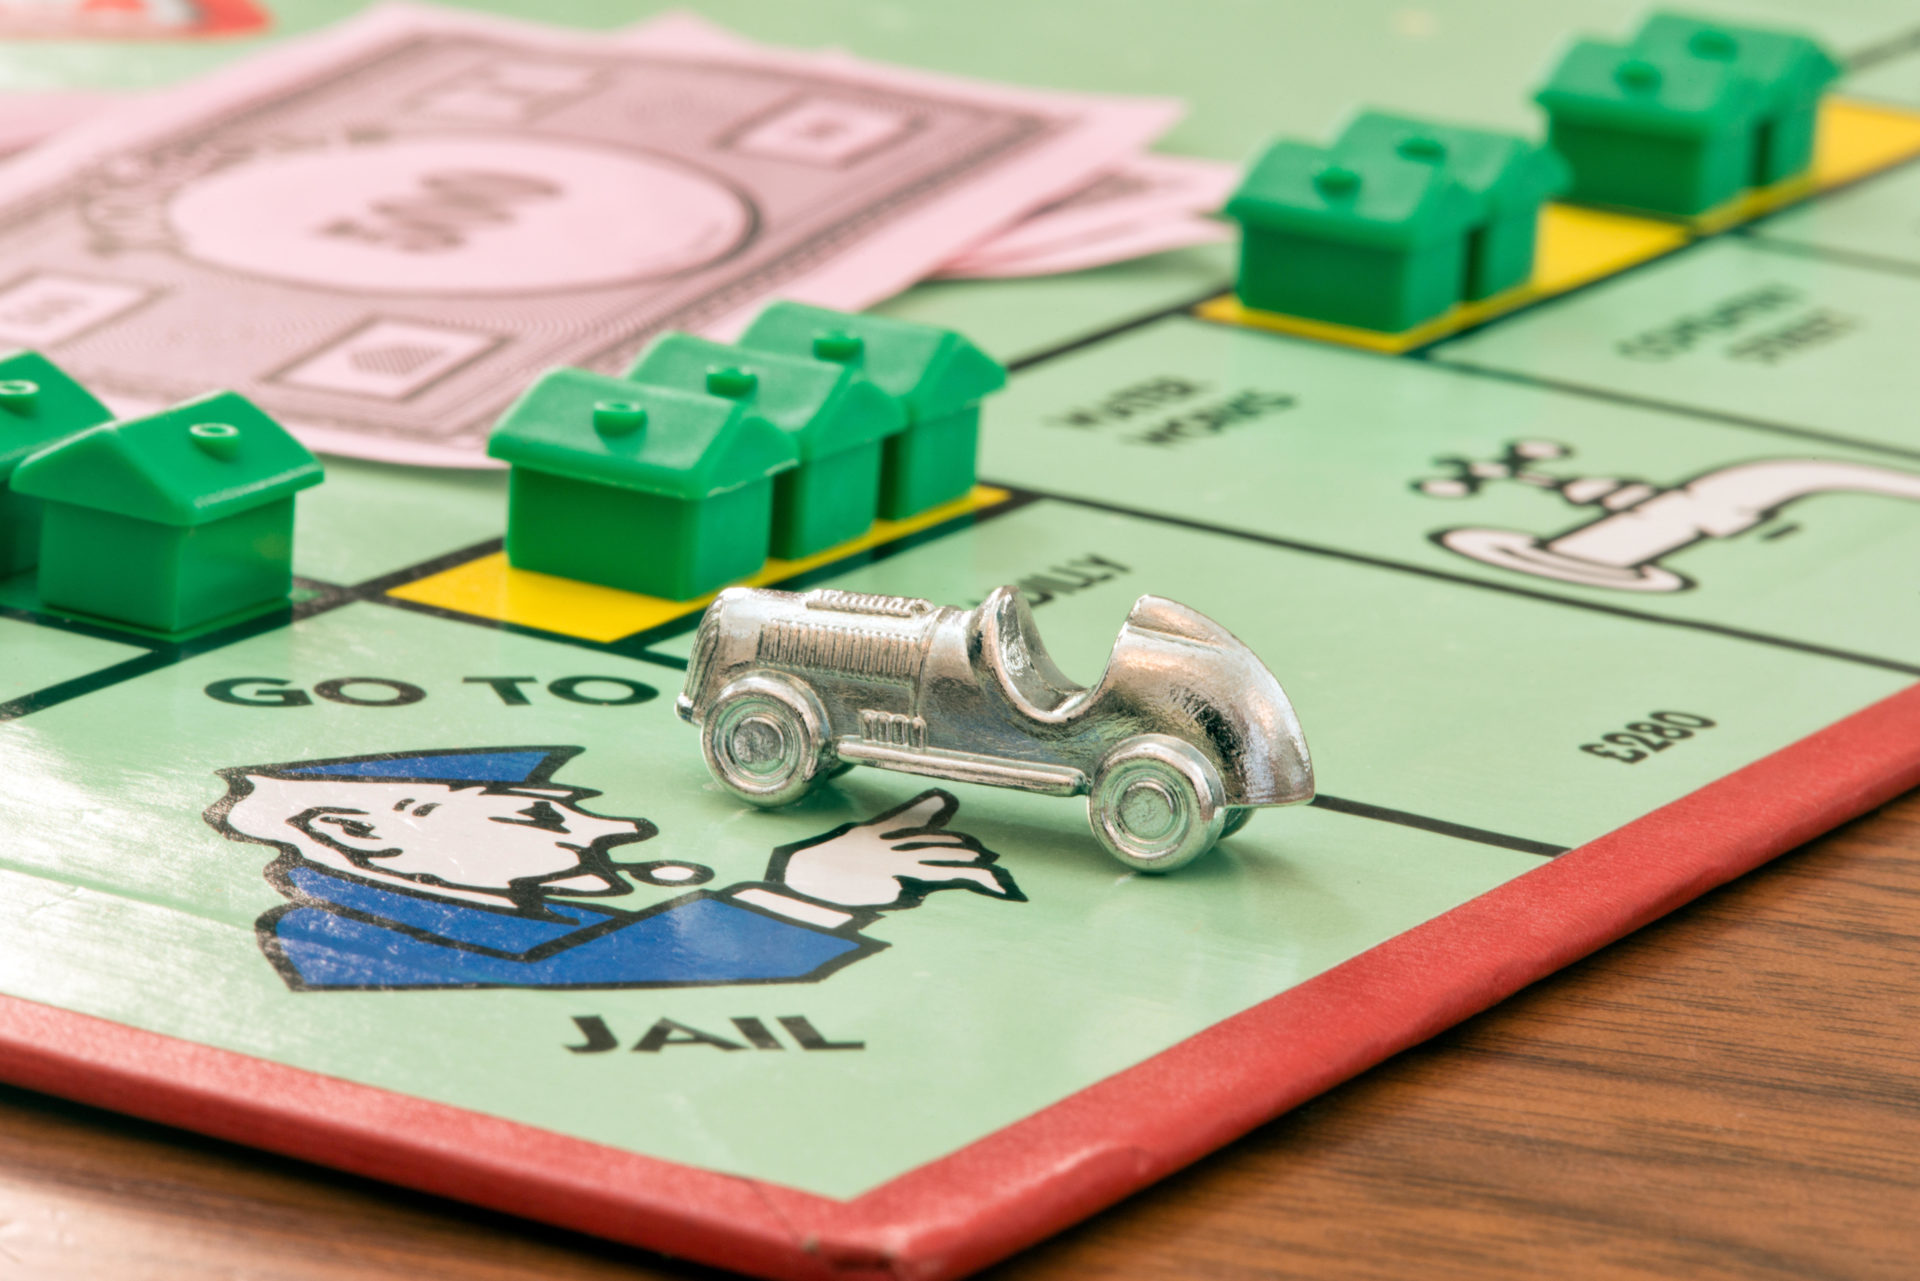 The metal car piece on the go to jail square in Monopoly. Image: Martin Bennett / Alamy